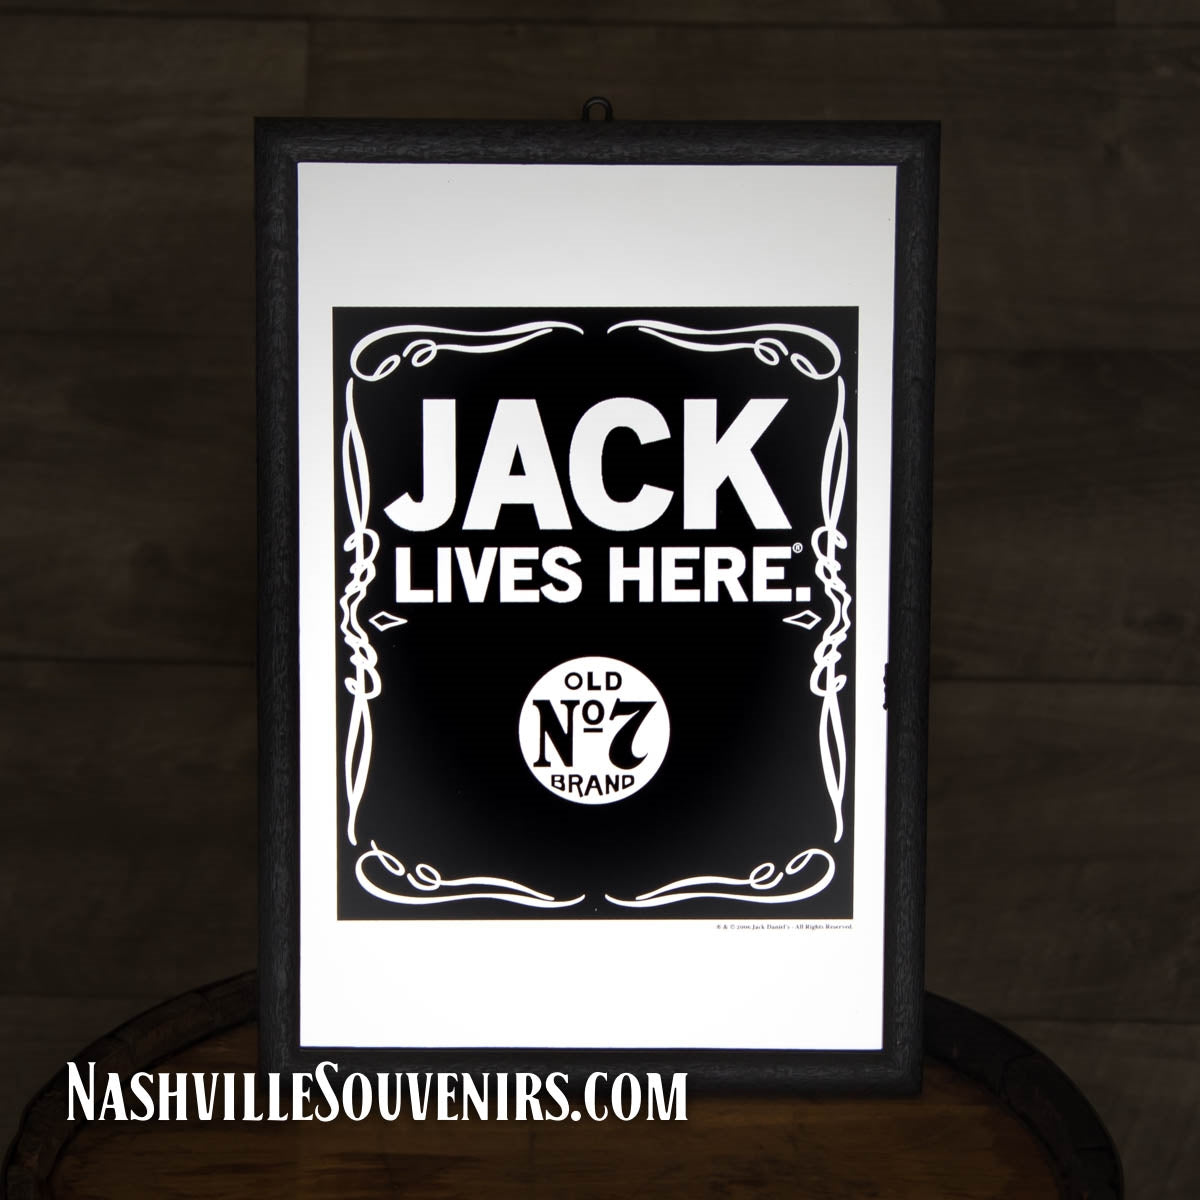 Officially licensed Jack Daniel's "Jack Lives Here" Mirror. FREE SHIPPING on all US orders over $75!